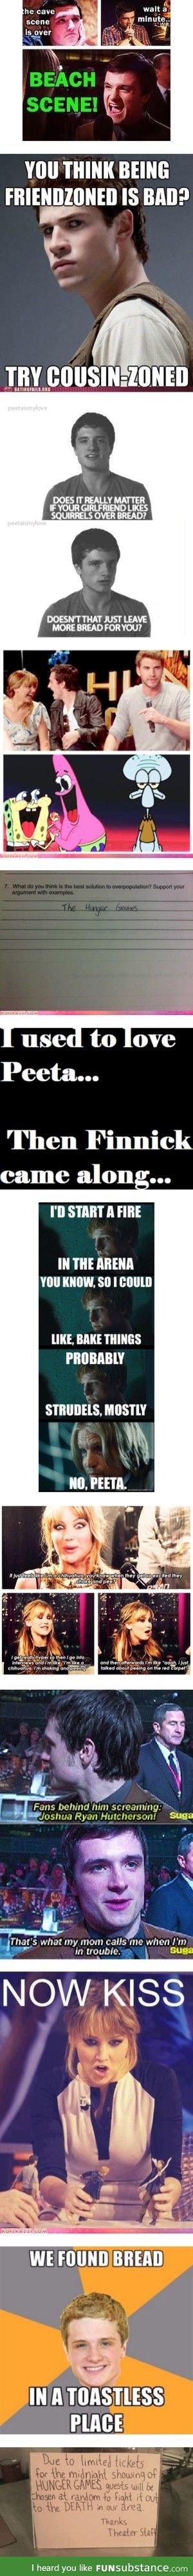 just another the hunger games post.